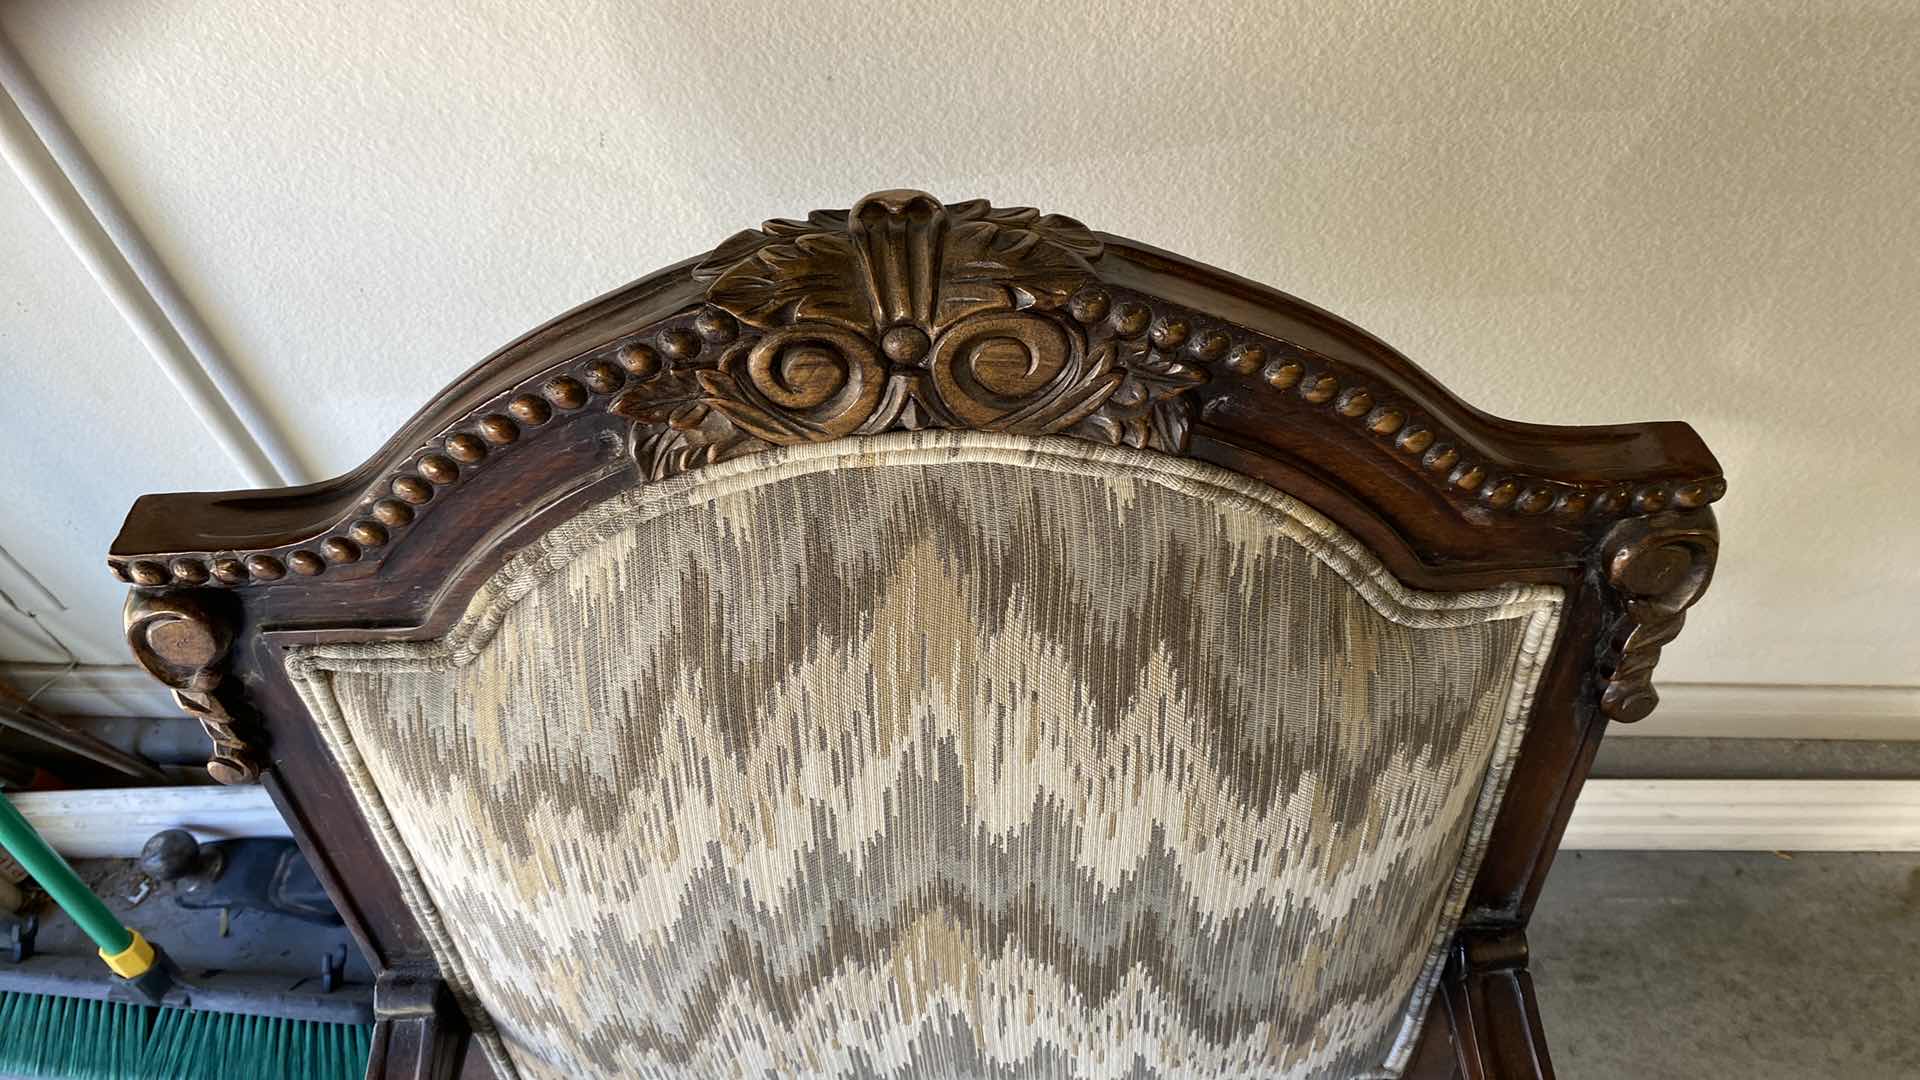 Photo 2 of ORNATE WOOD OCCASIONAL CHAIR REUPHOLSTERED WITH STAIN RESISTANT FABRIC ORIGINALLY $2,000